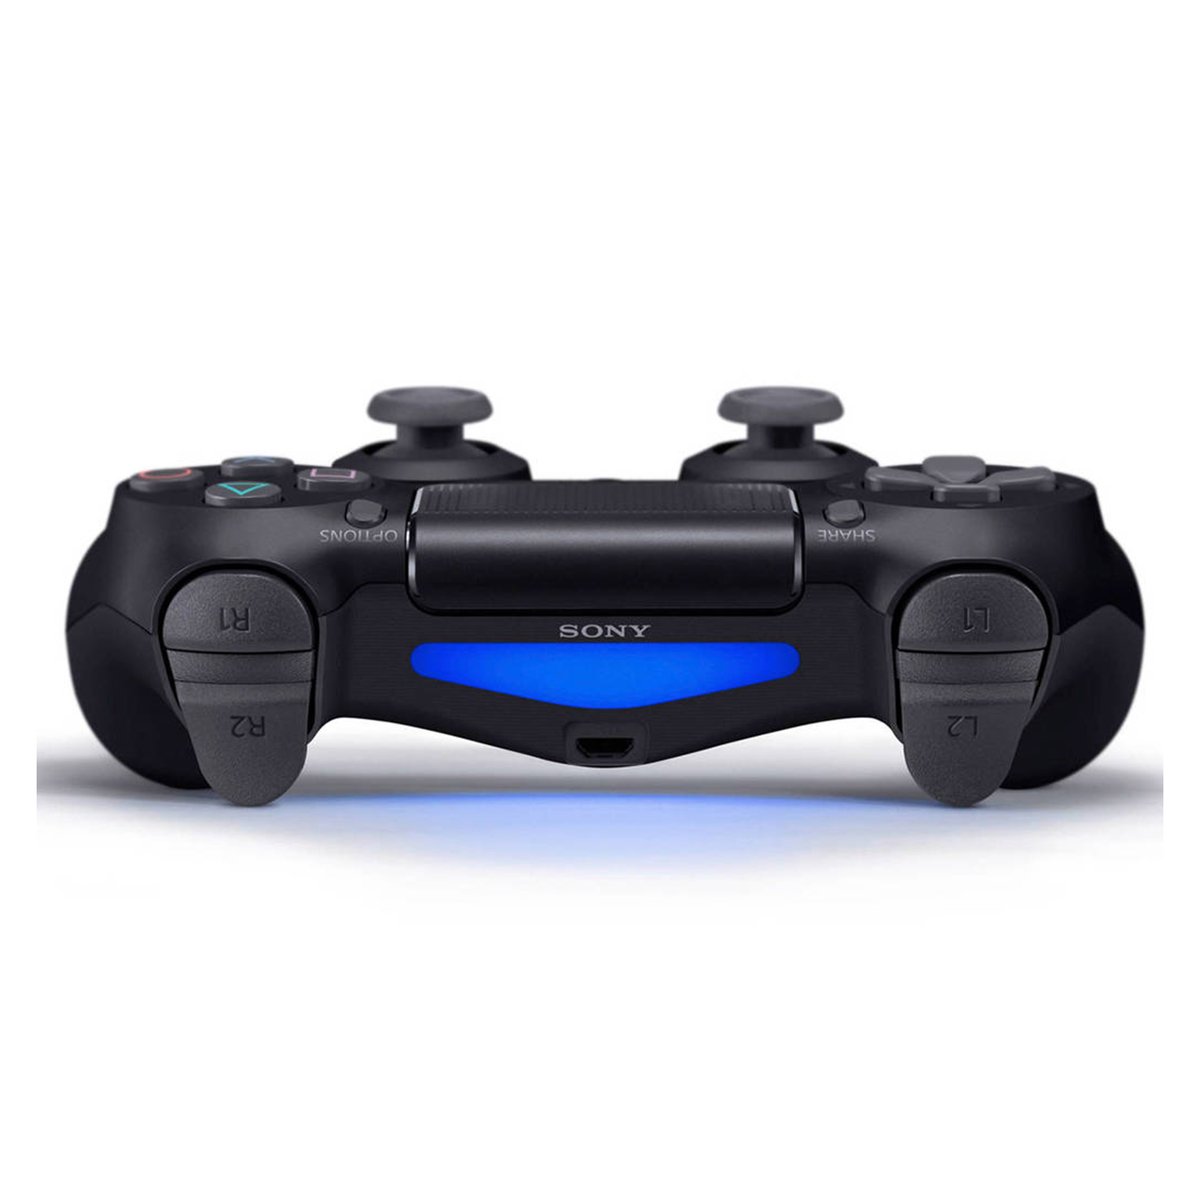 Sony DualShock 4 Wireless Controller For PlayStation 4 With Fortnite Bundle